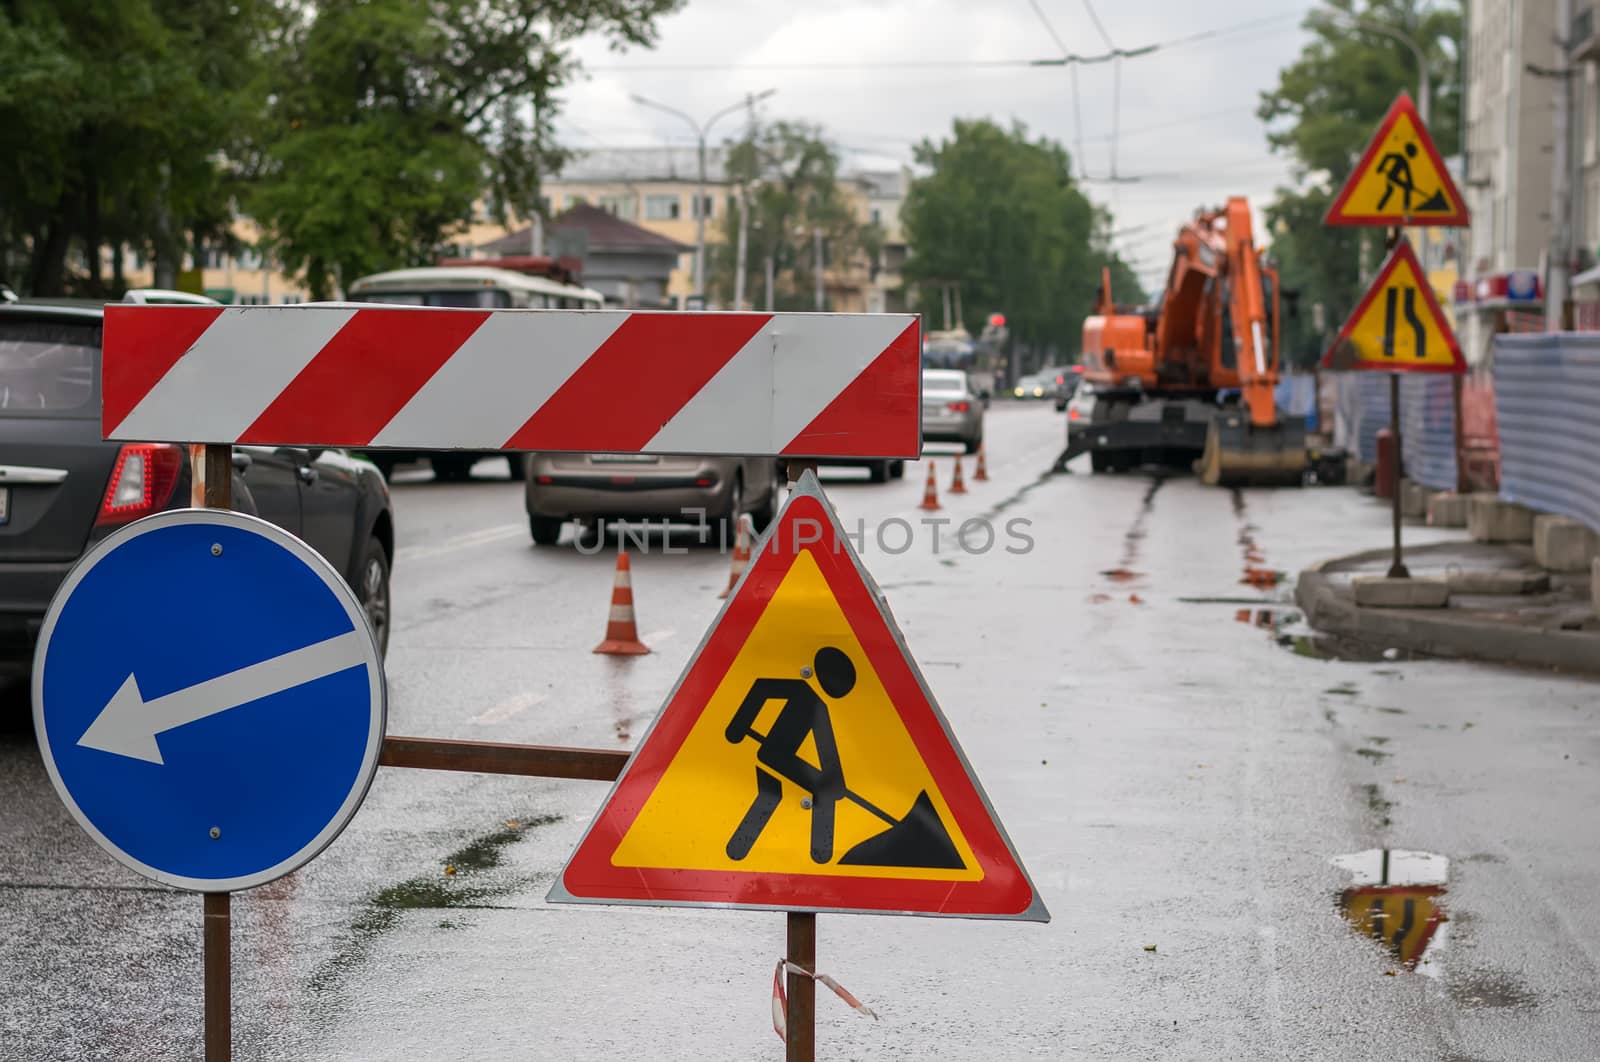 Traffic signs, detour, road repair on the background of the street and the excavator who digs the pit